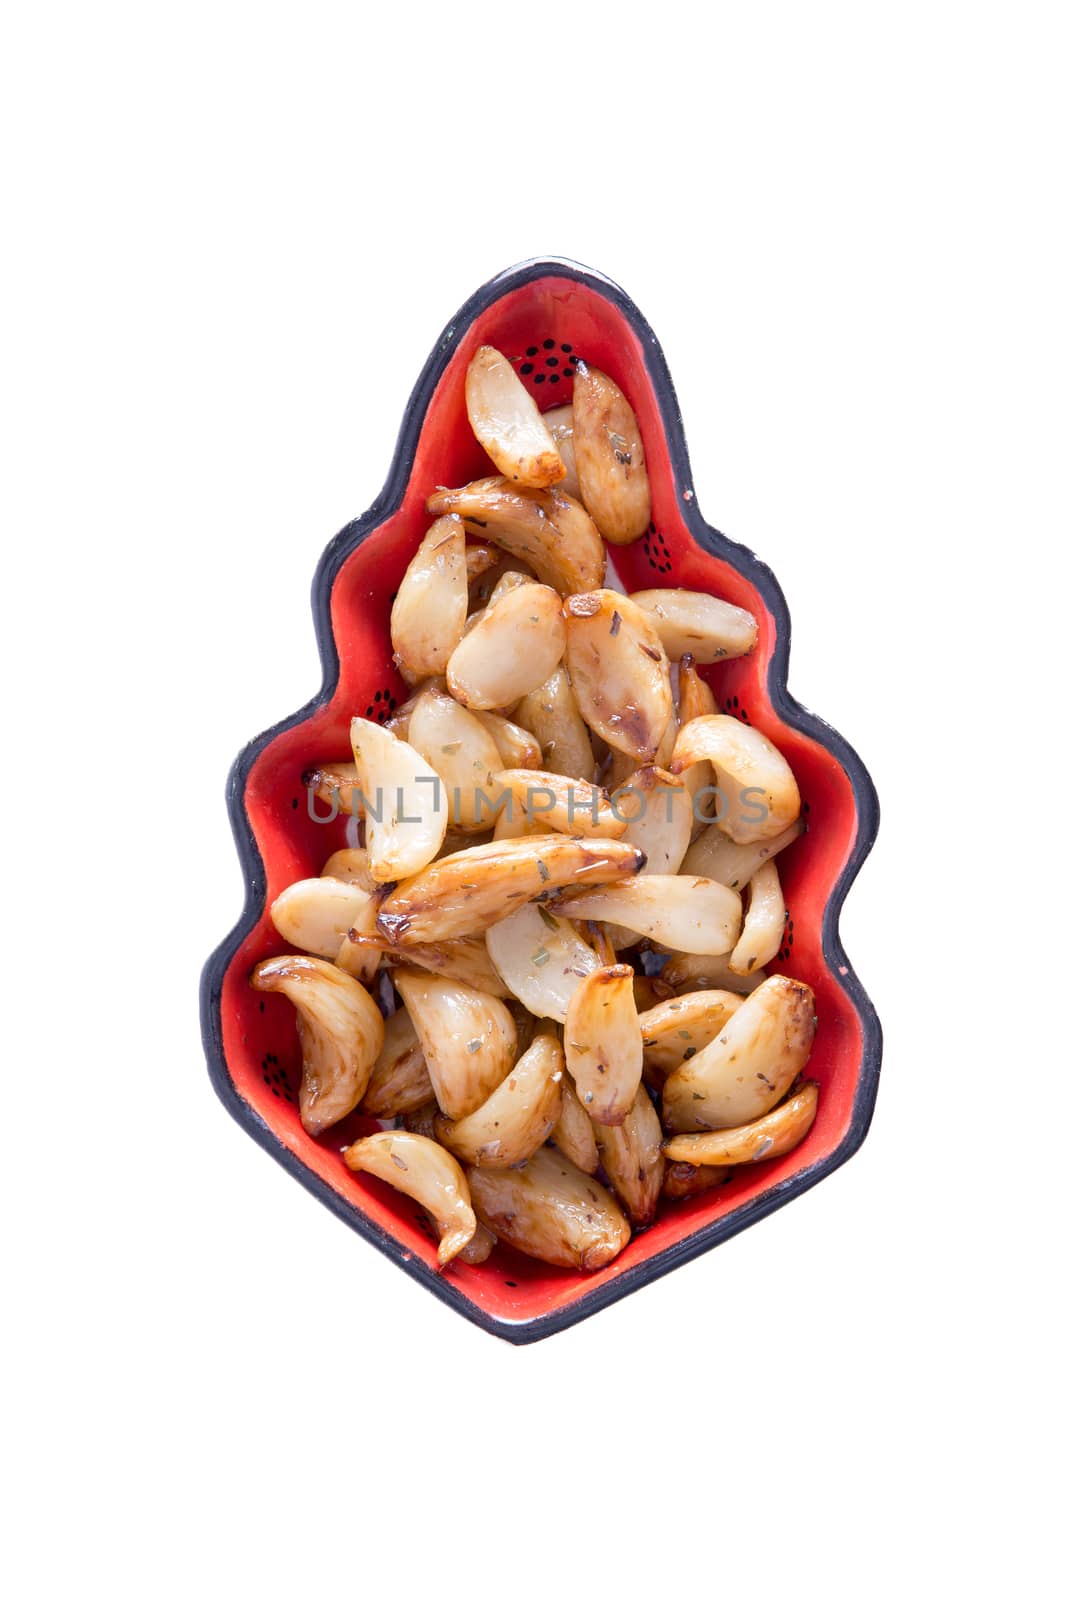 Roasted spicy marinated garlic cloves in a decorative leaf-shaped glazed pottery dish viewed from overhead centered on a white background